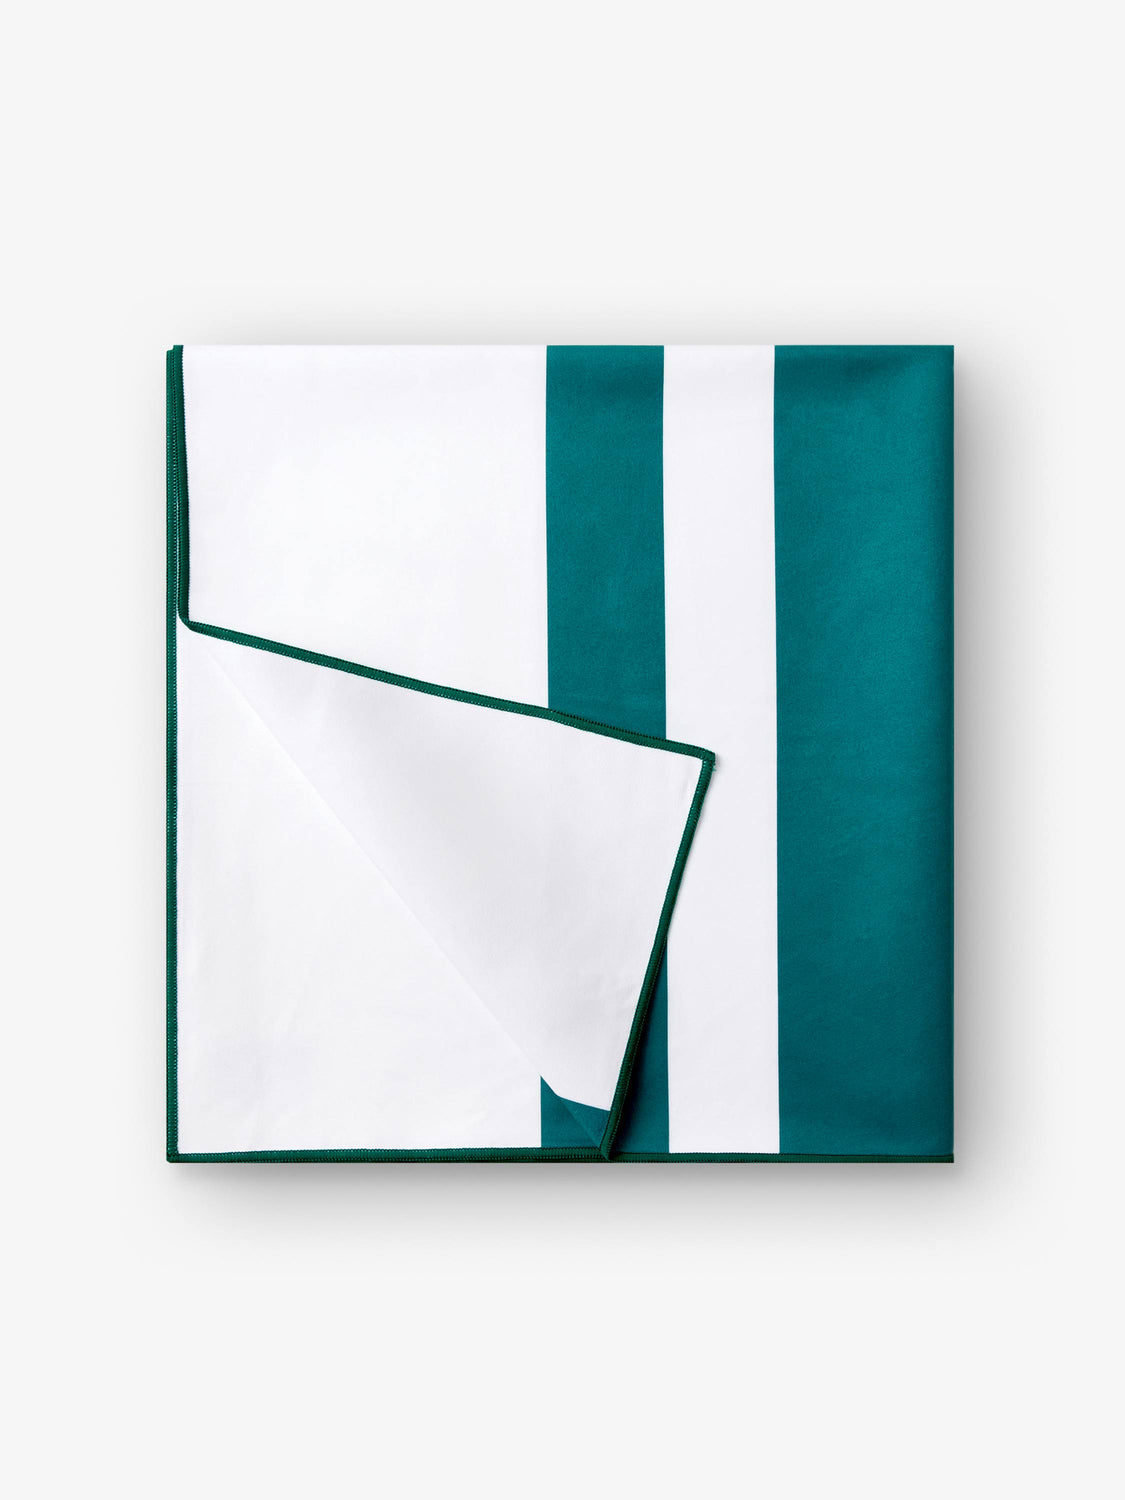 A folded quick drying, green and white striped microfiber beach towel.